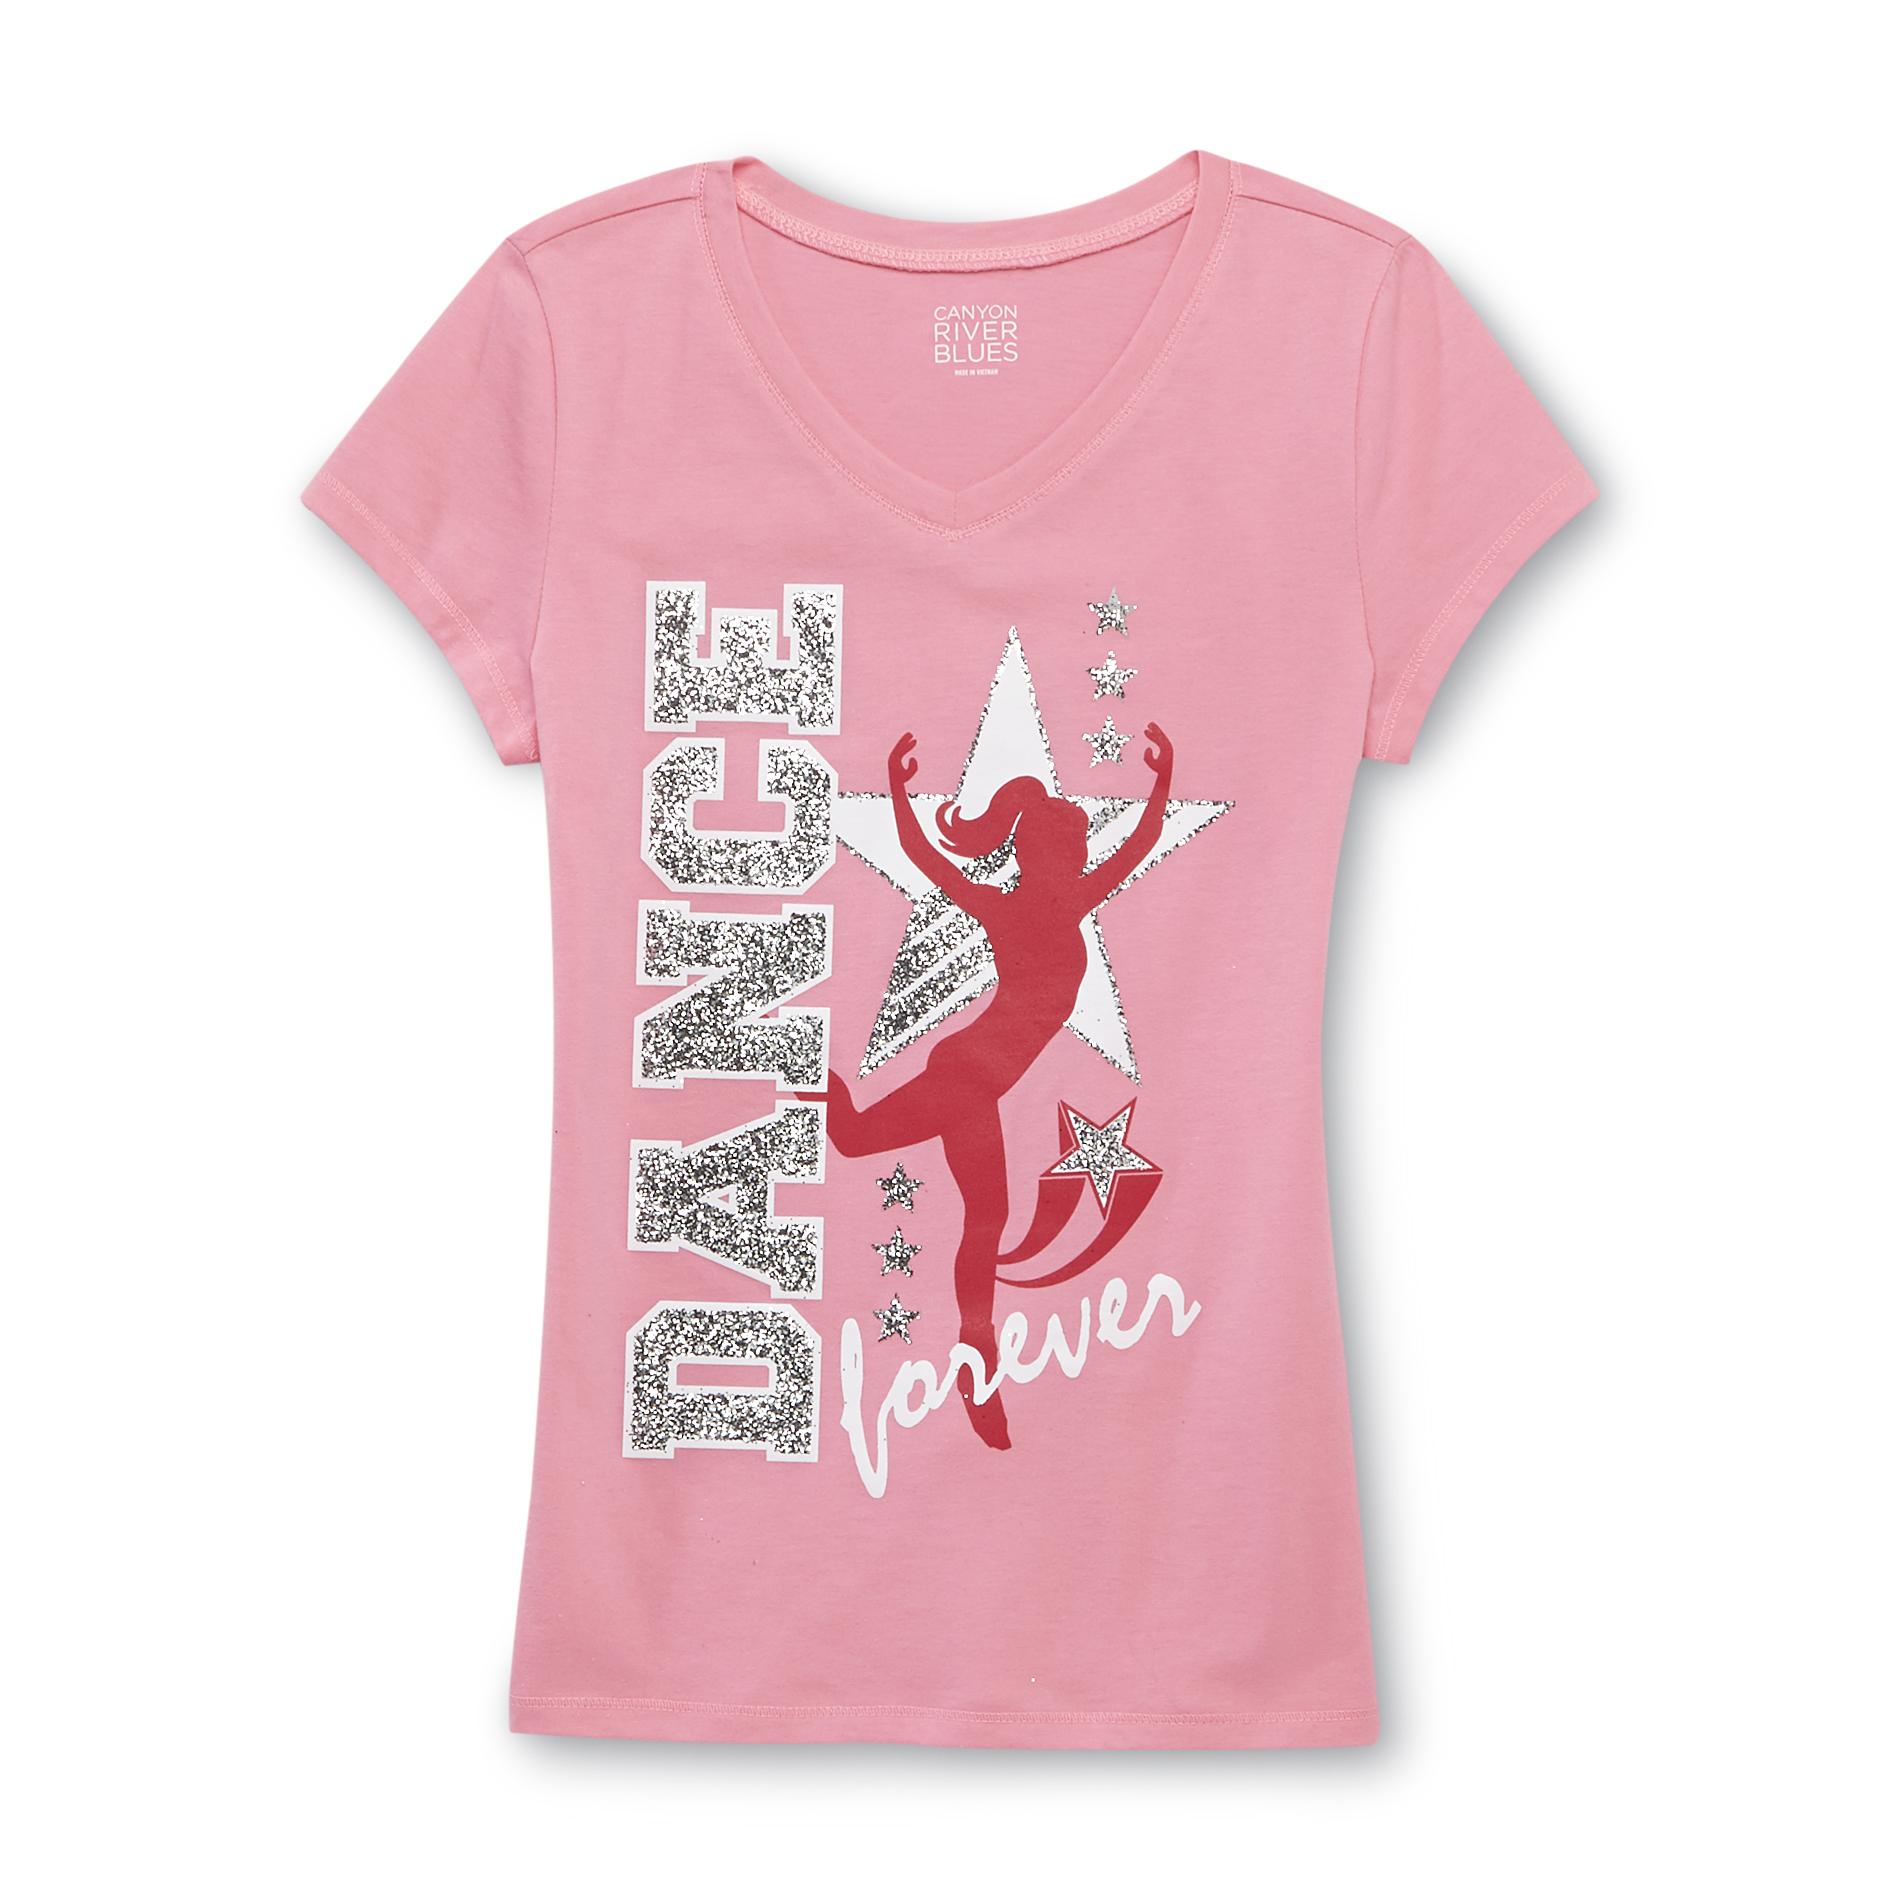 Canyon River Blues Girl's Graphic T-Shirt - Dance Forever